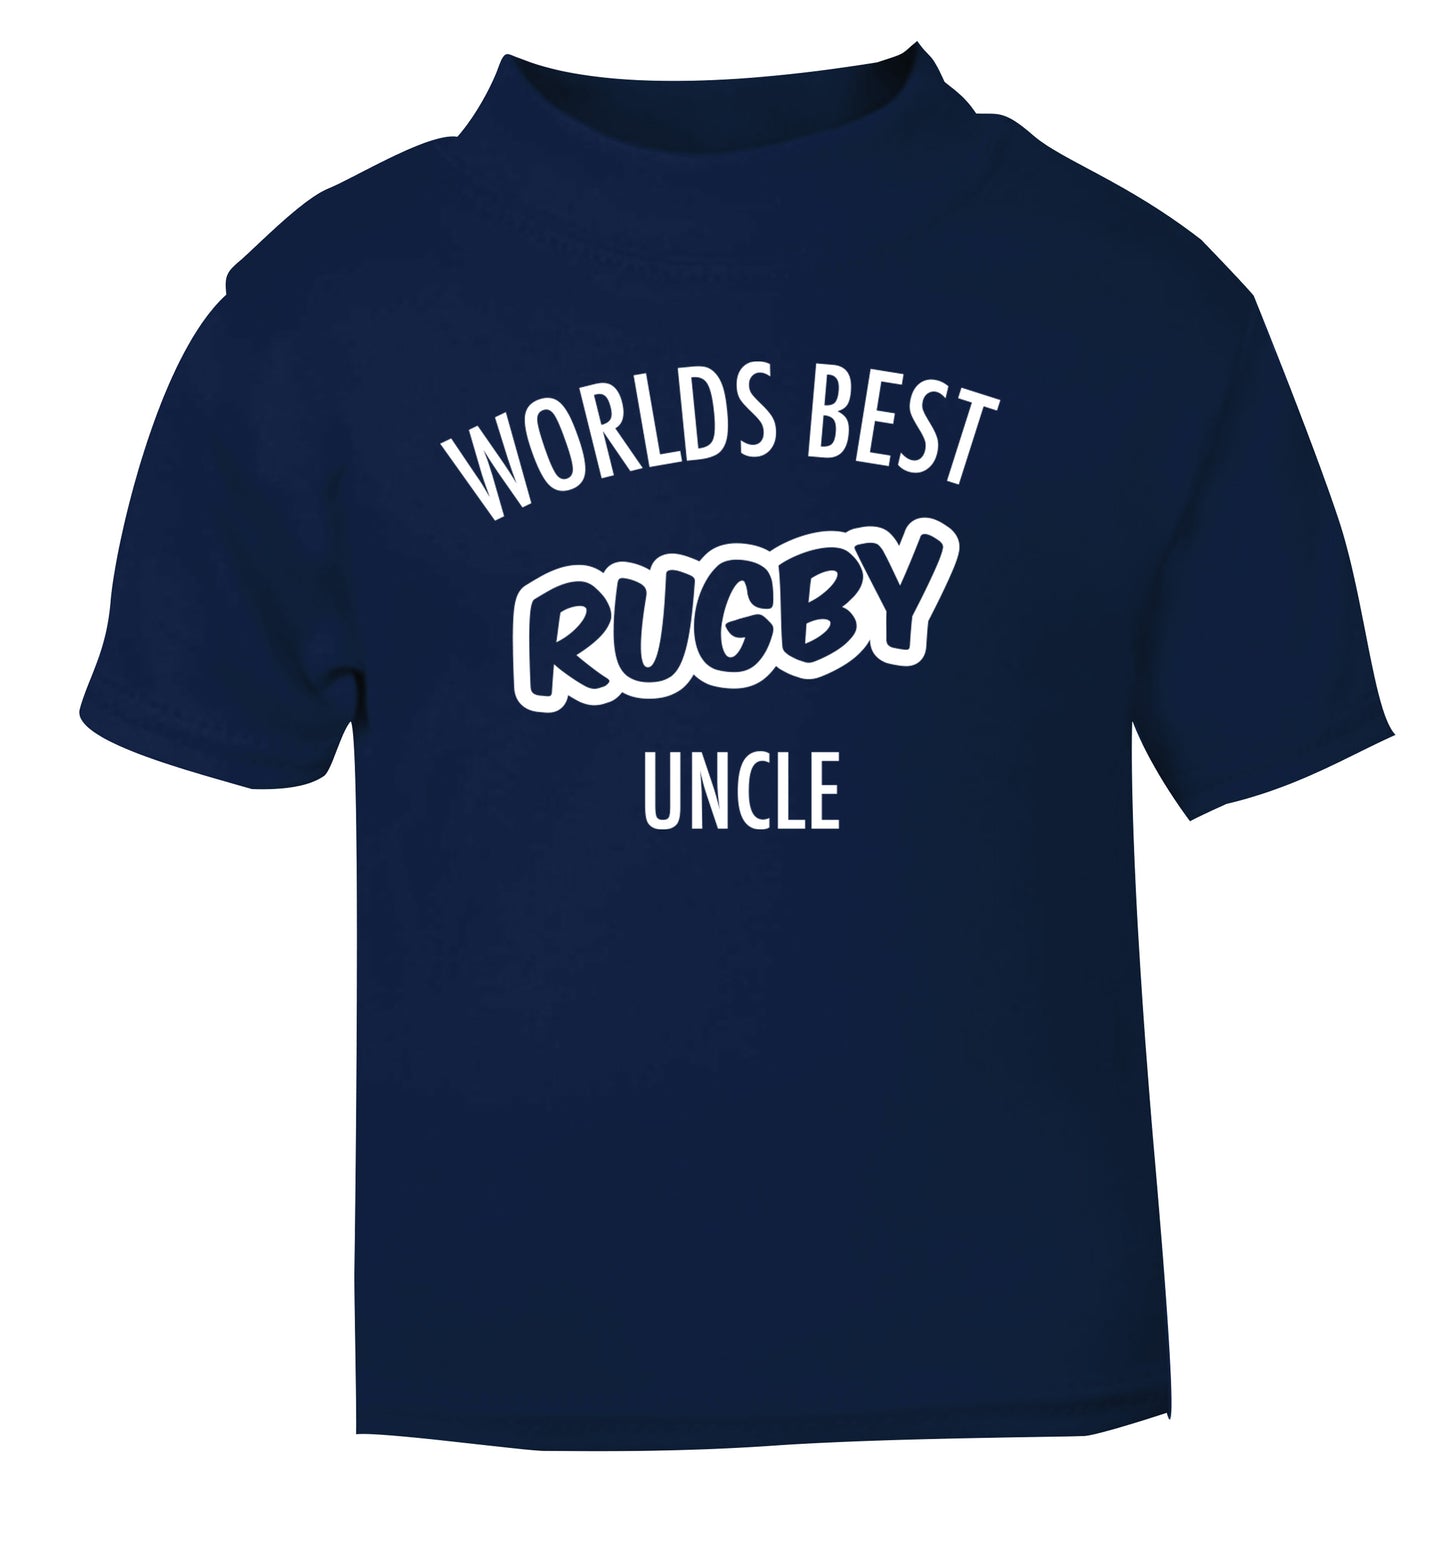 Worlds best rugby uncle navy Baby Toddler Tshirt 2 Years